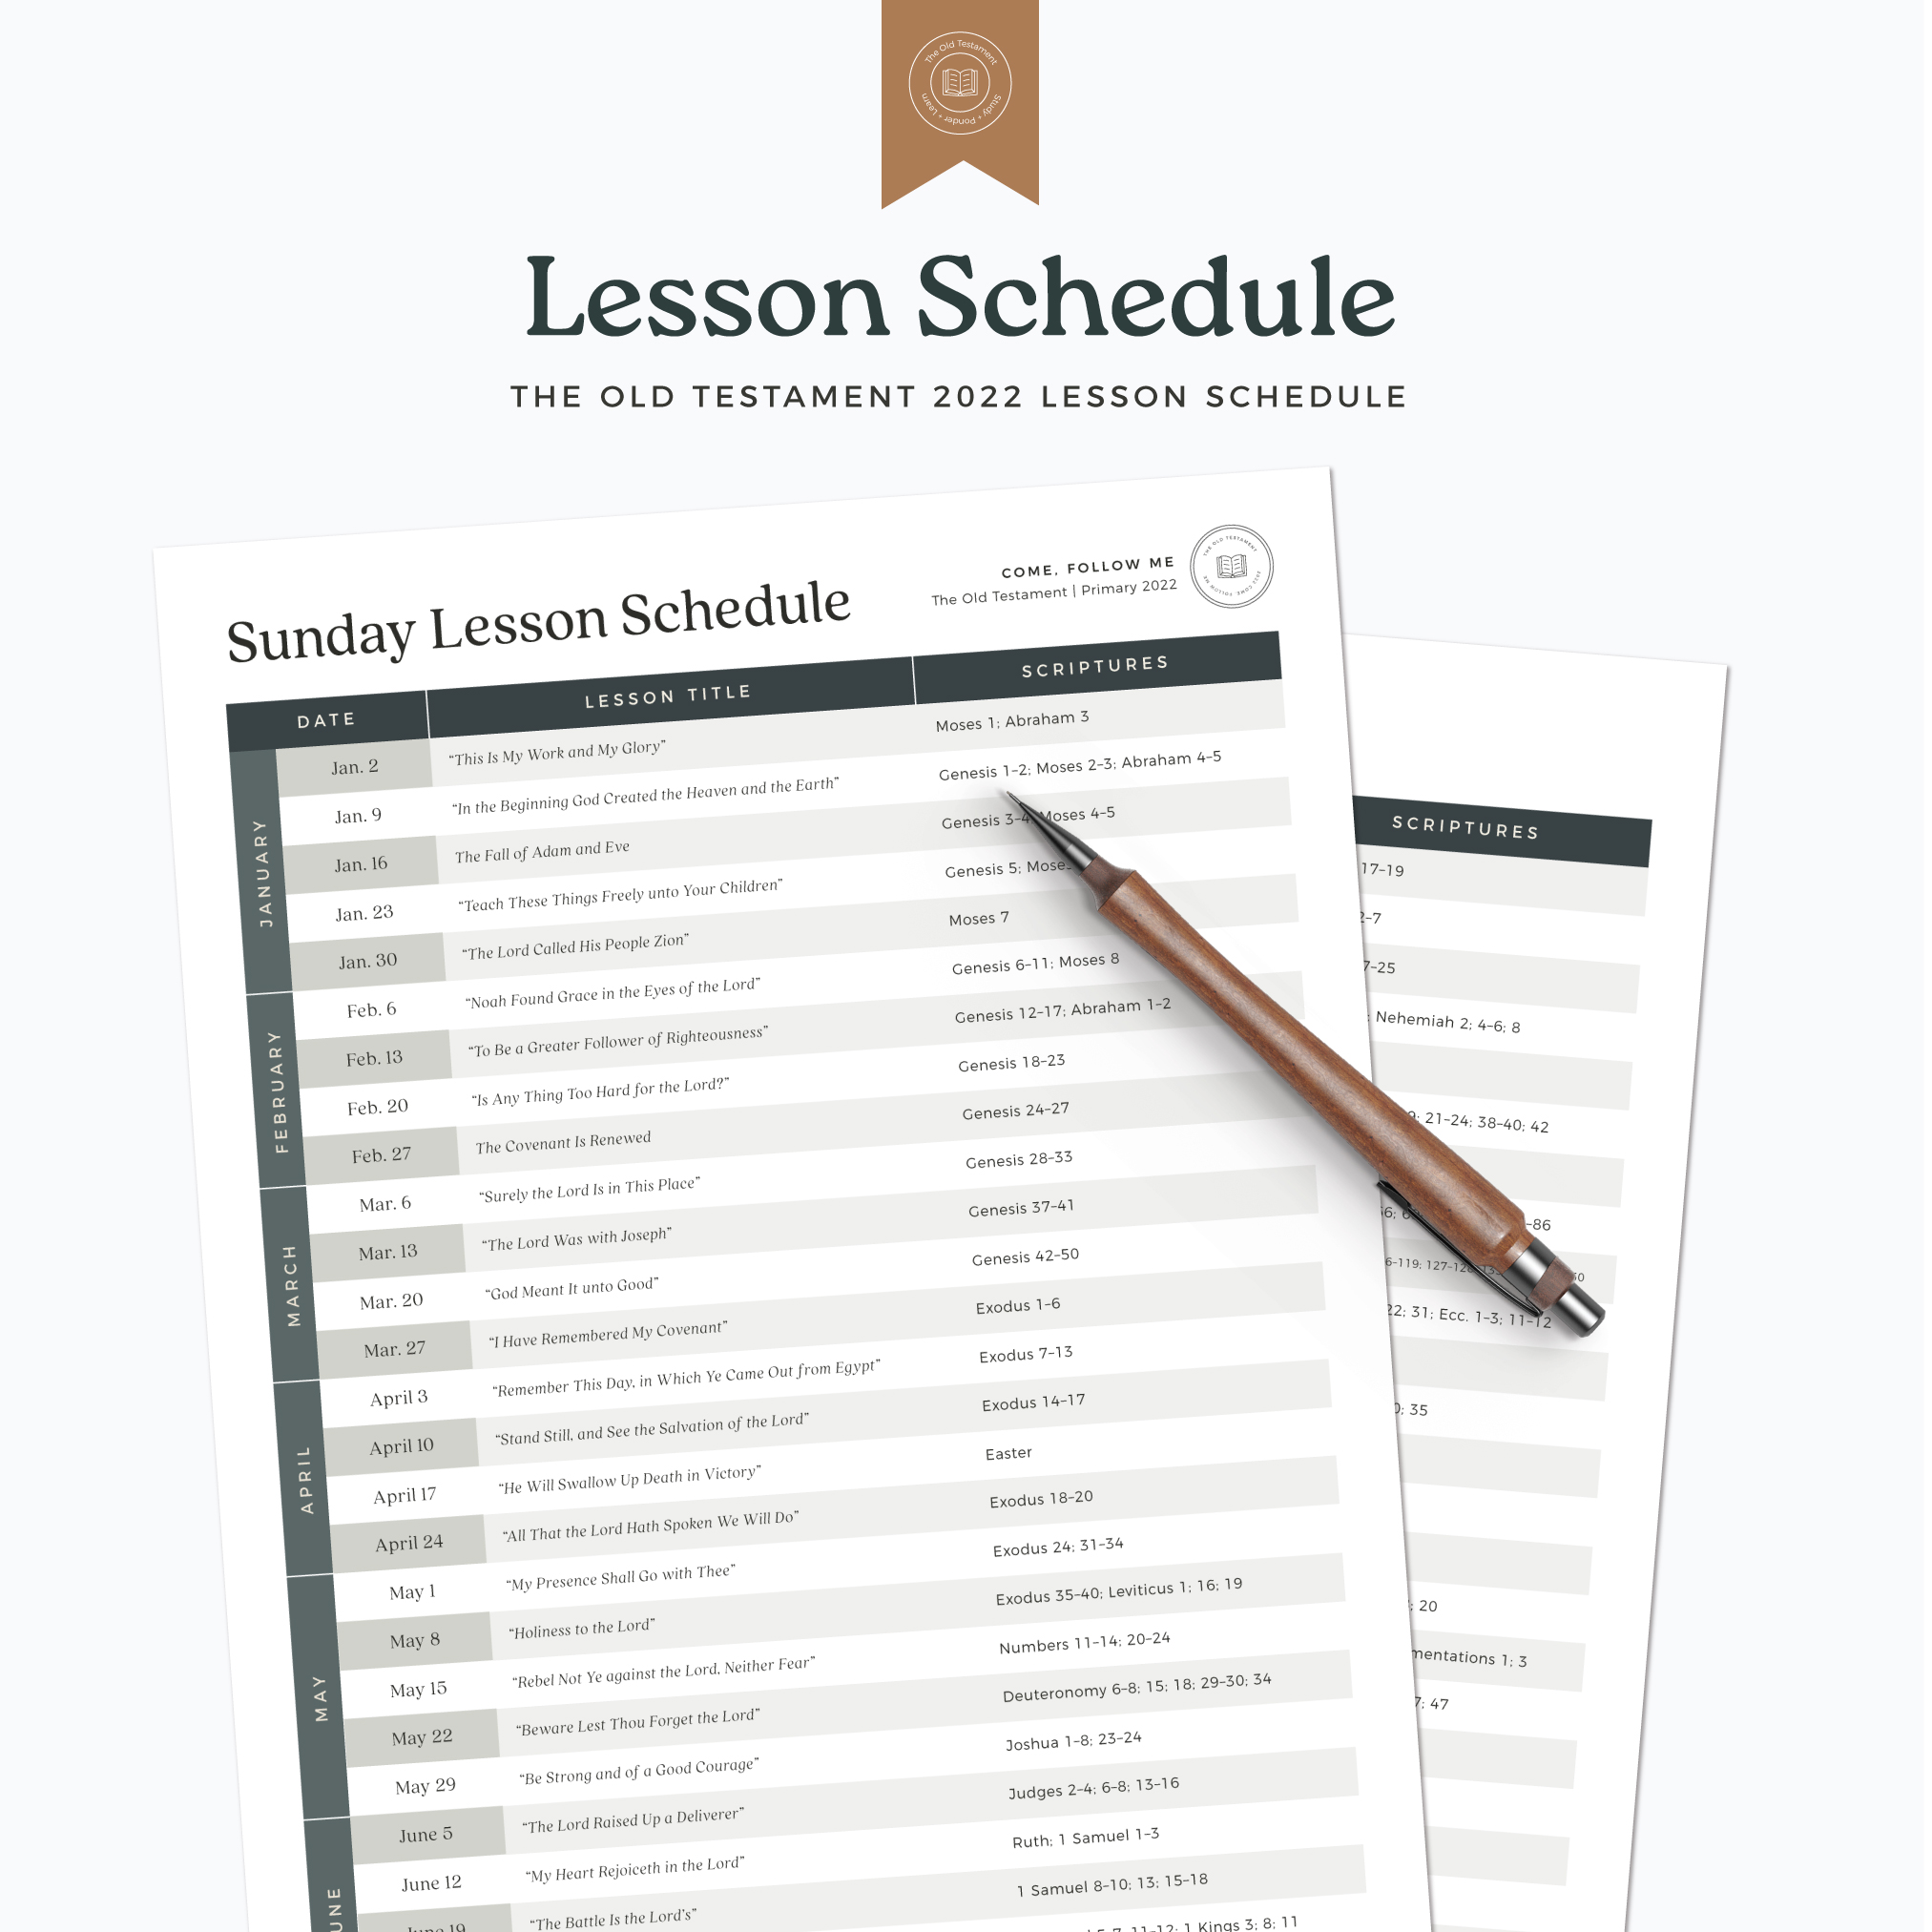 Lds Primary Lesson Schedule 2022 2022 Primary – Old Testament: Primary Presidency Planner - The Red Headed  Hostess